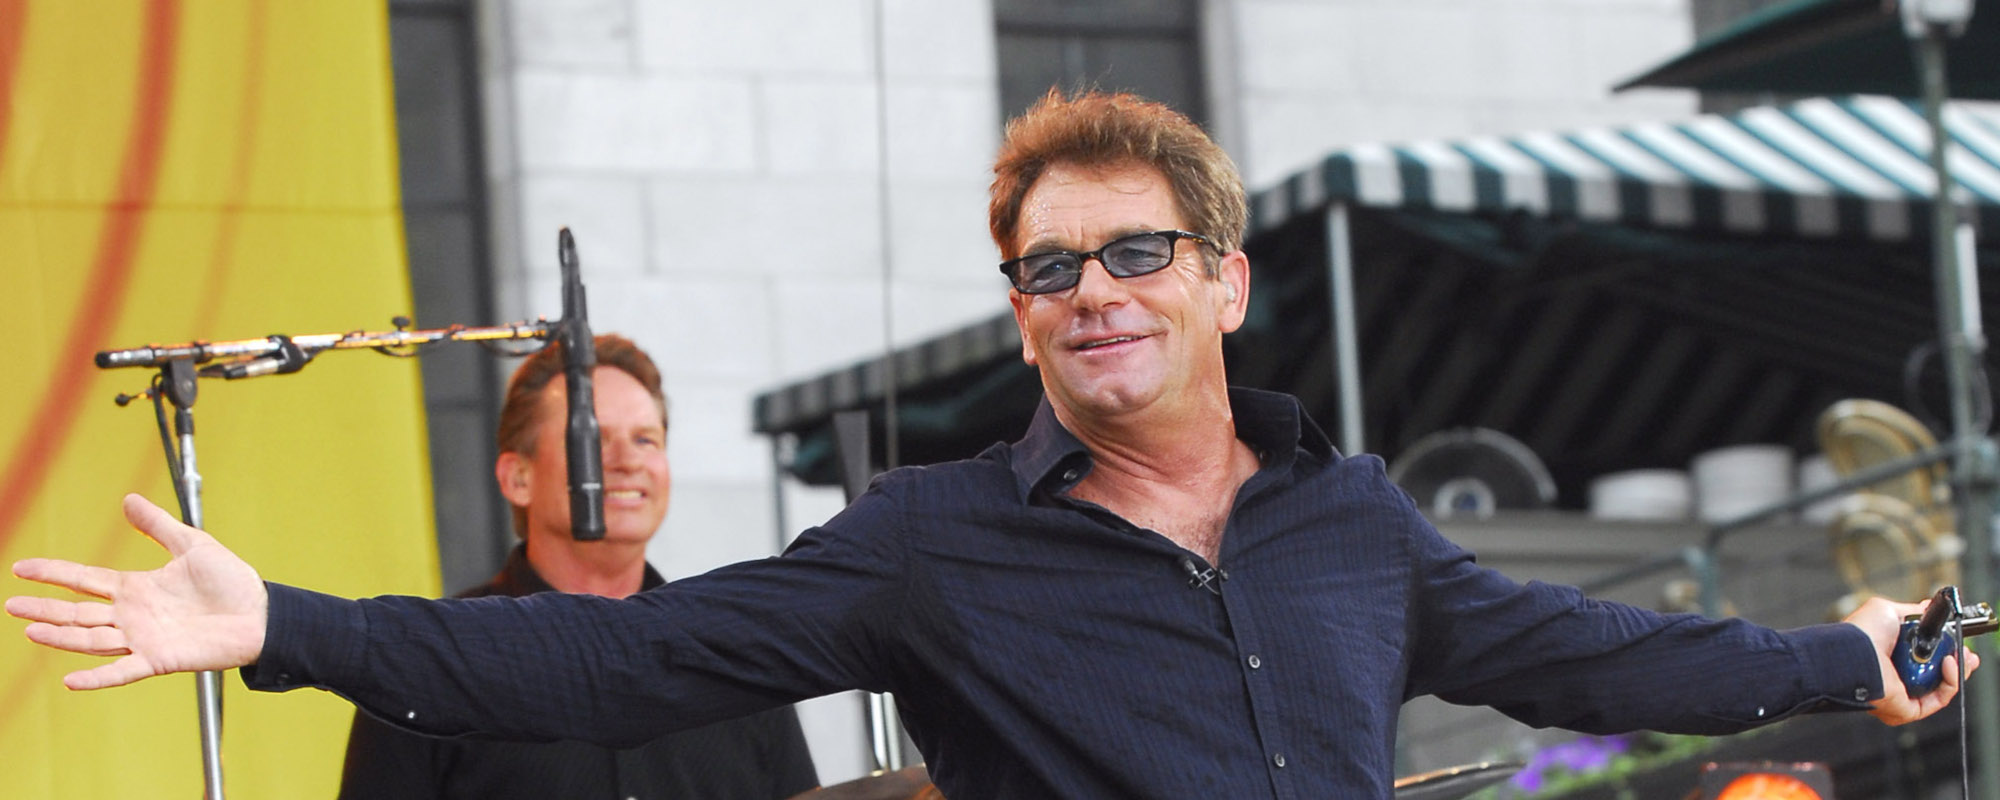 New Musical Comedy Coming to Broadway Inspired By Huey Lewis and the News Hits